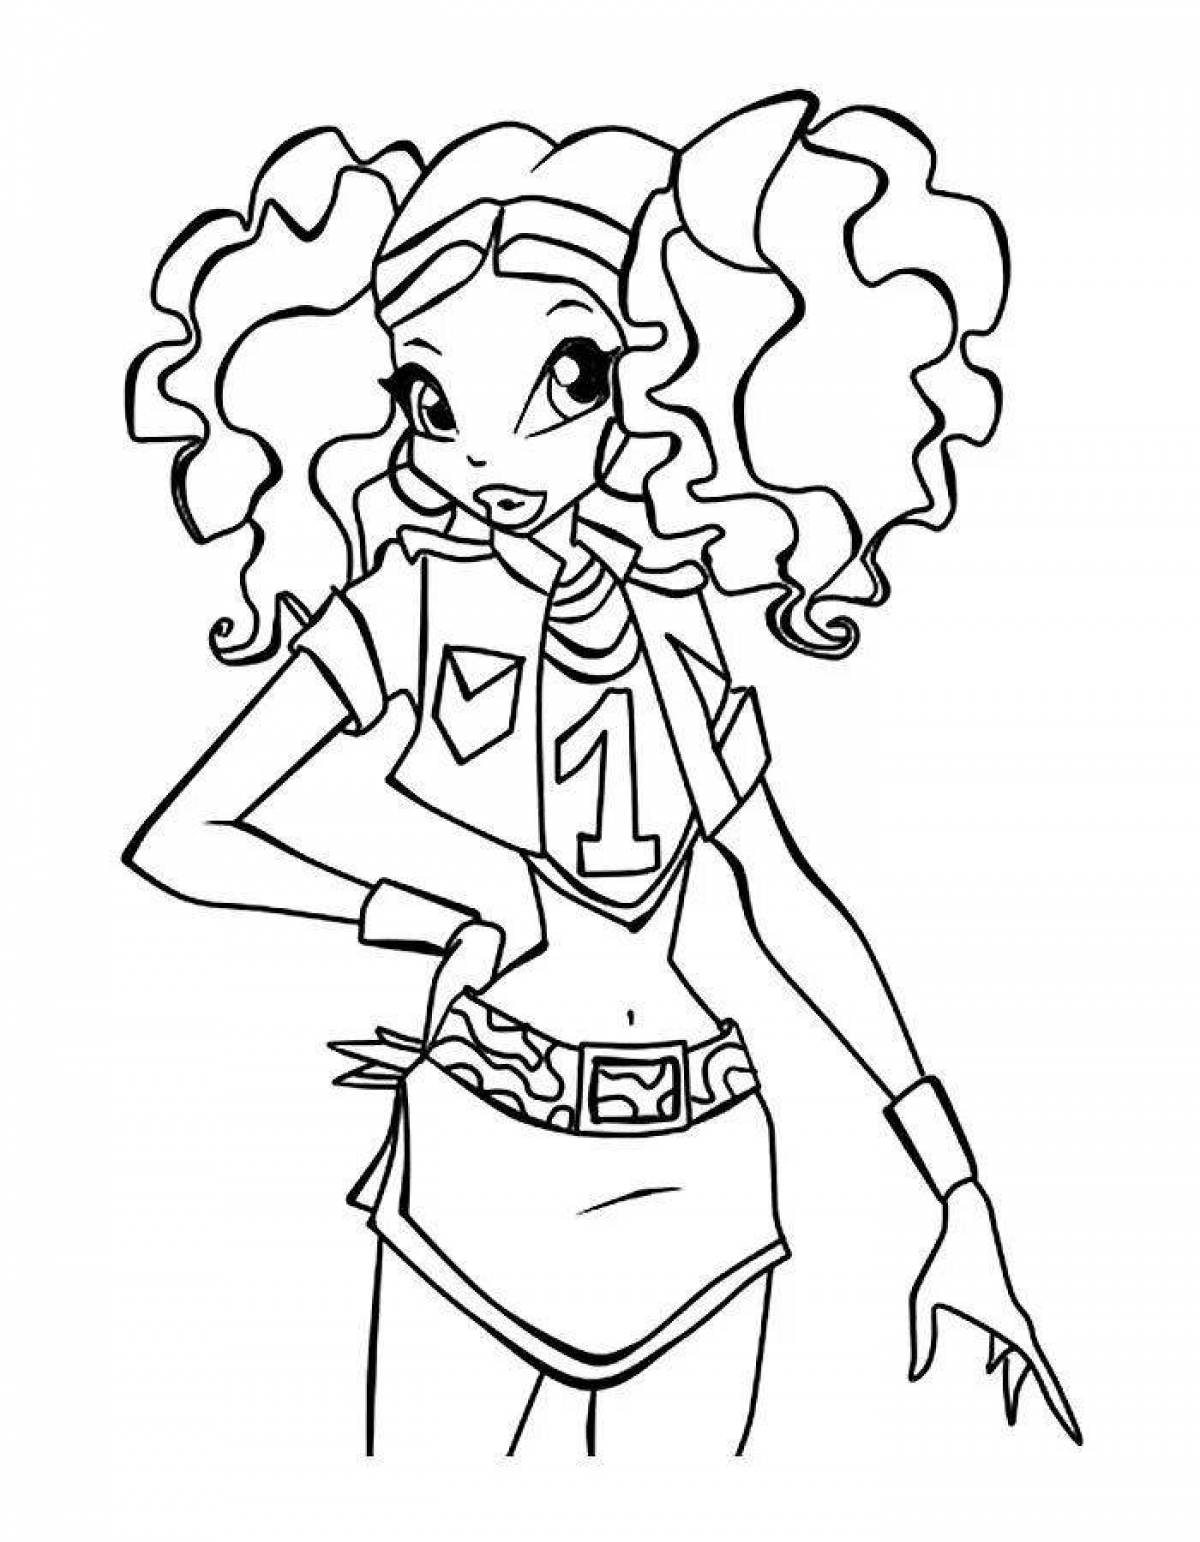 Layla's playful coloring page